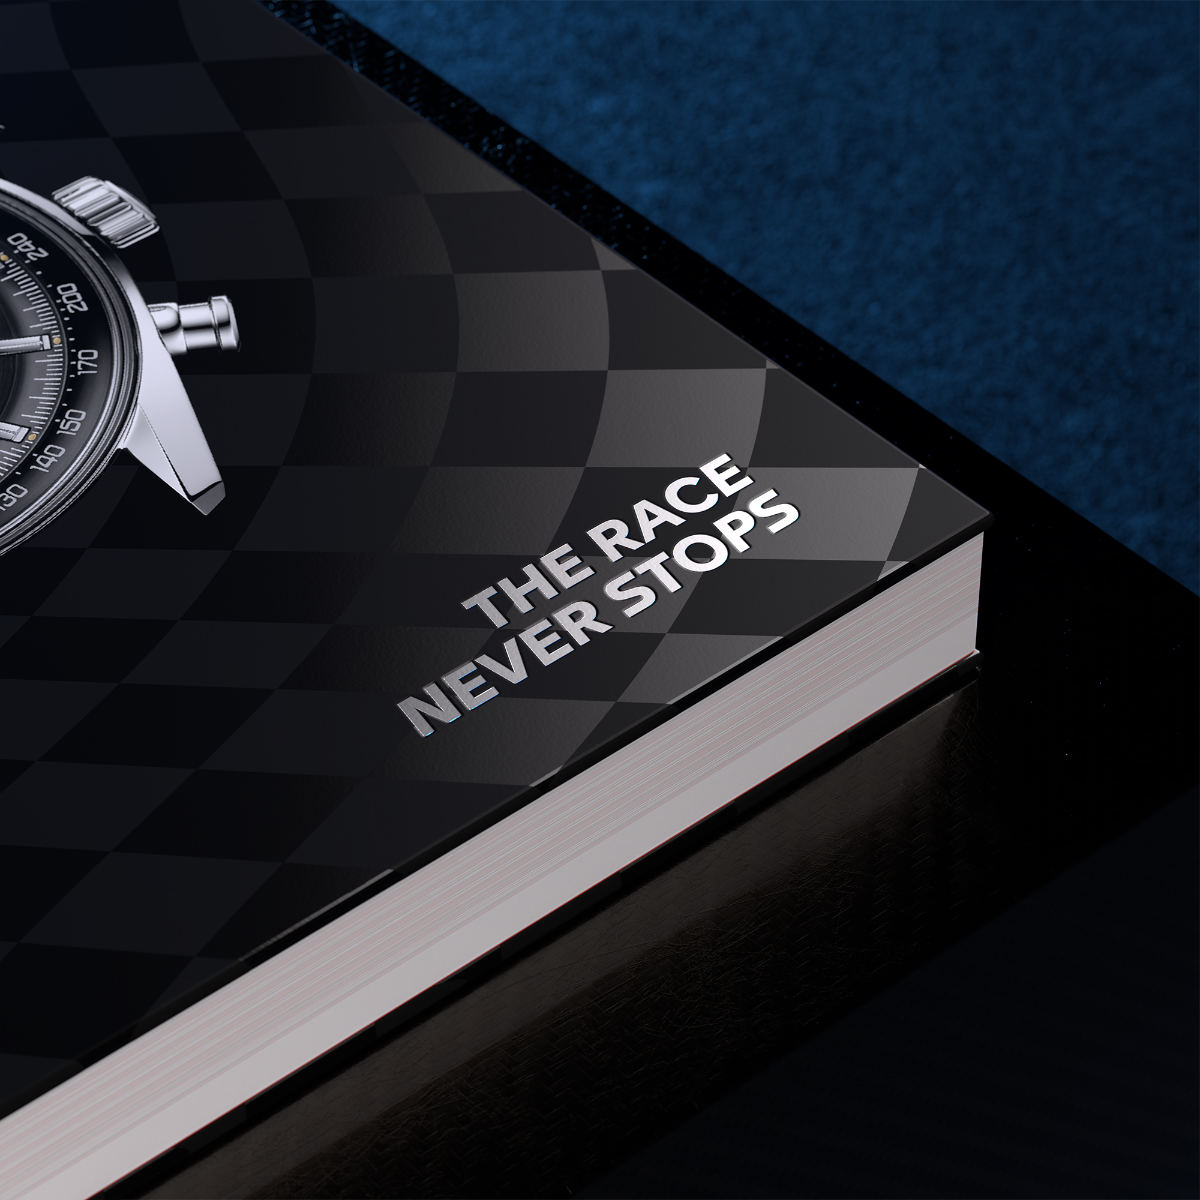 A Remarkable Book Novelty: “TAG Heuer Carrera The Race Never Stops”